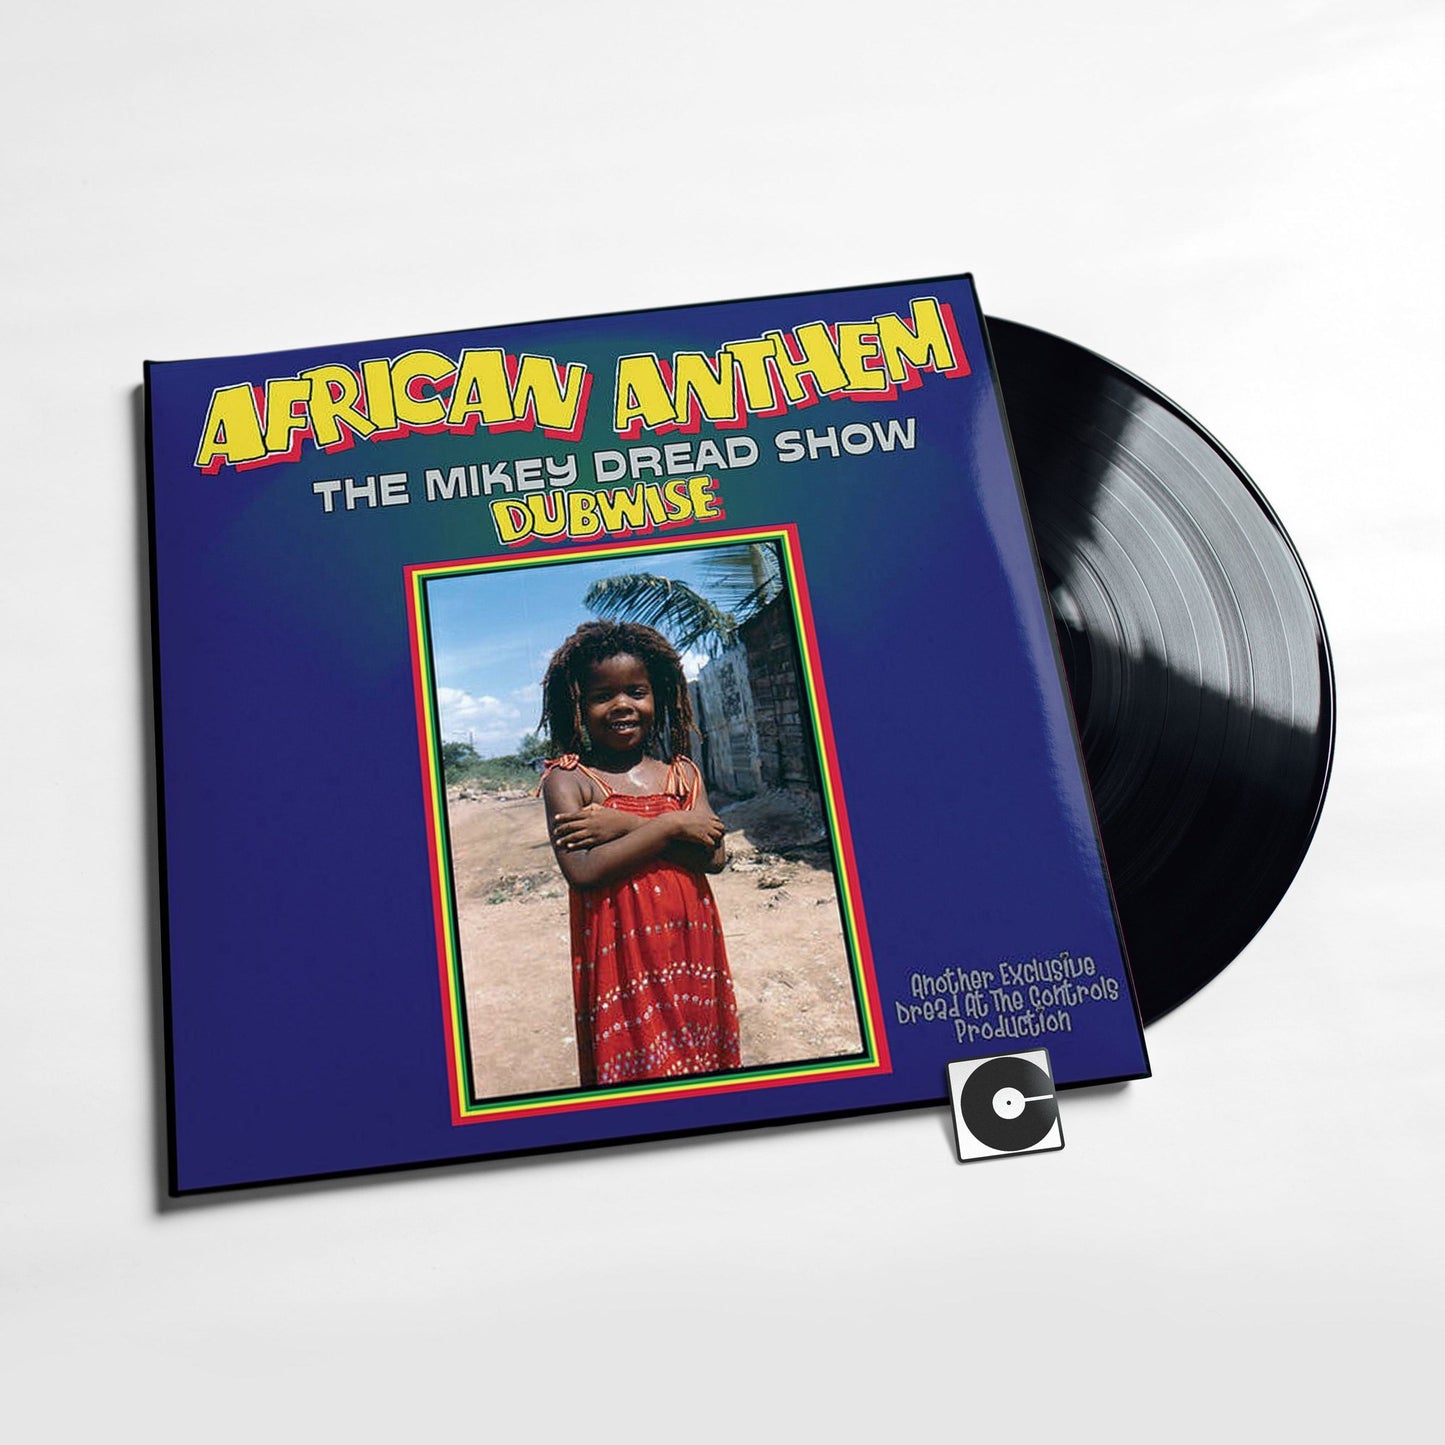 Mikey Dread - "African Anthem Dubwise: The Mikey Dread Show"